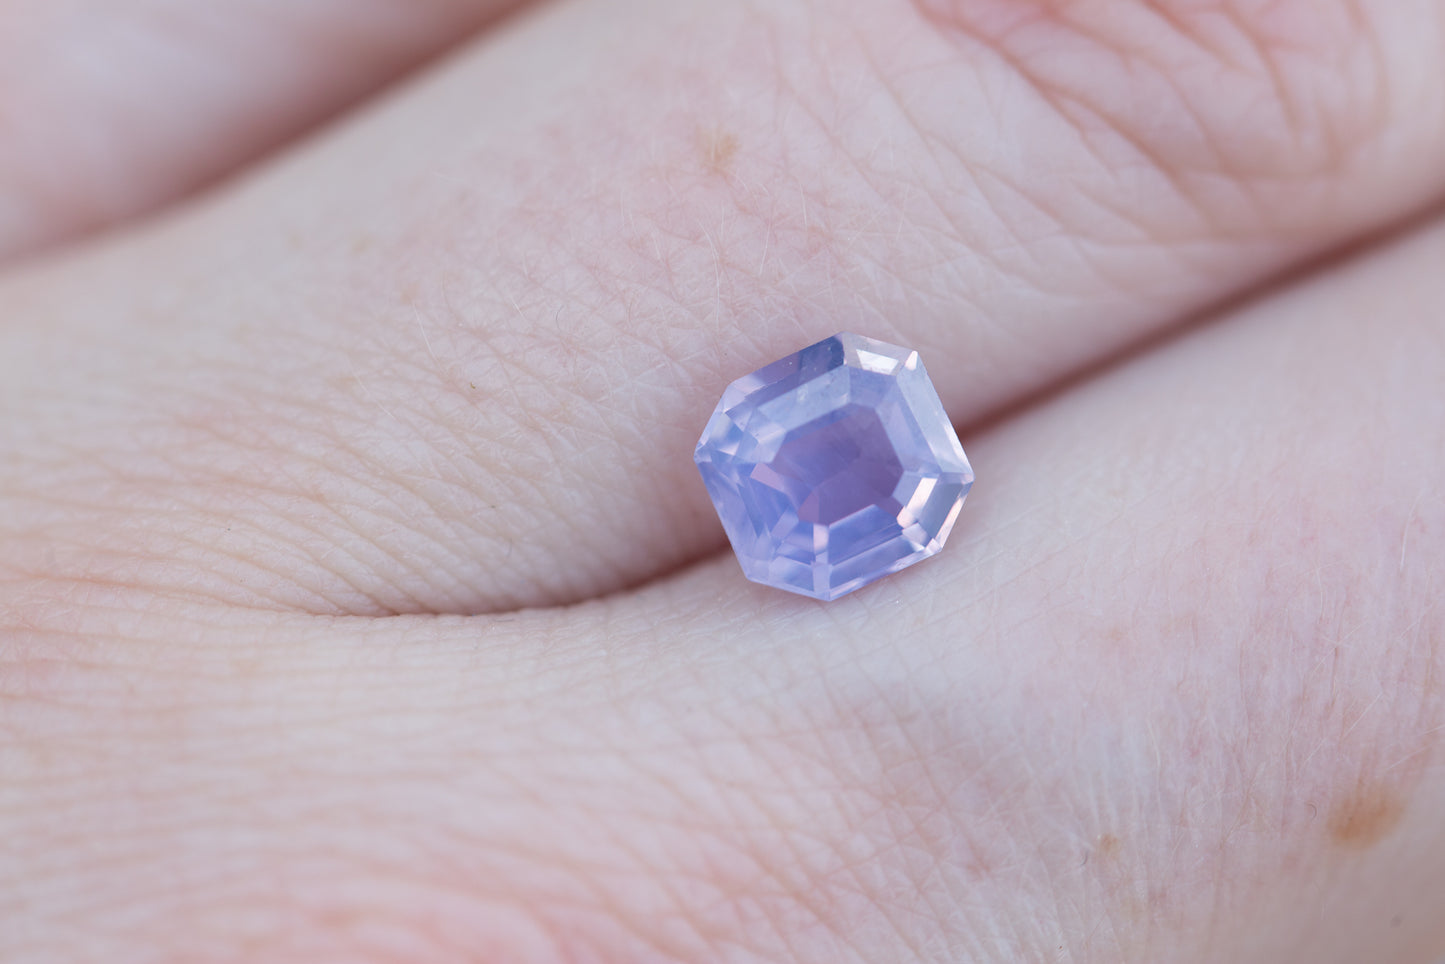 Load image into Gallery viewer, 1.83ct octagonal step cut opalescent lavender sapphire
